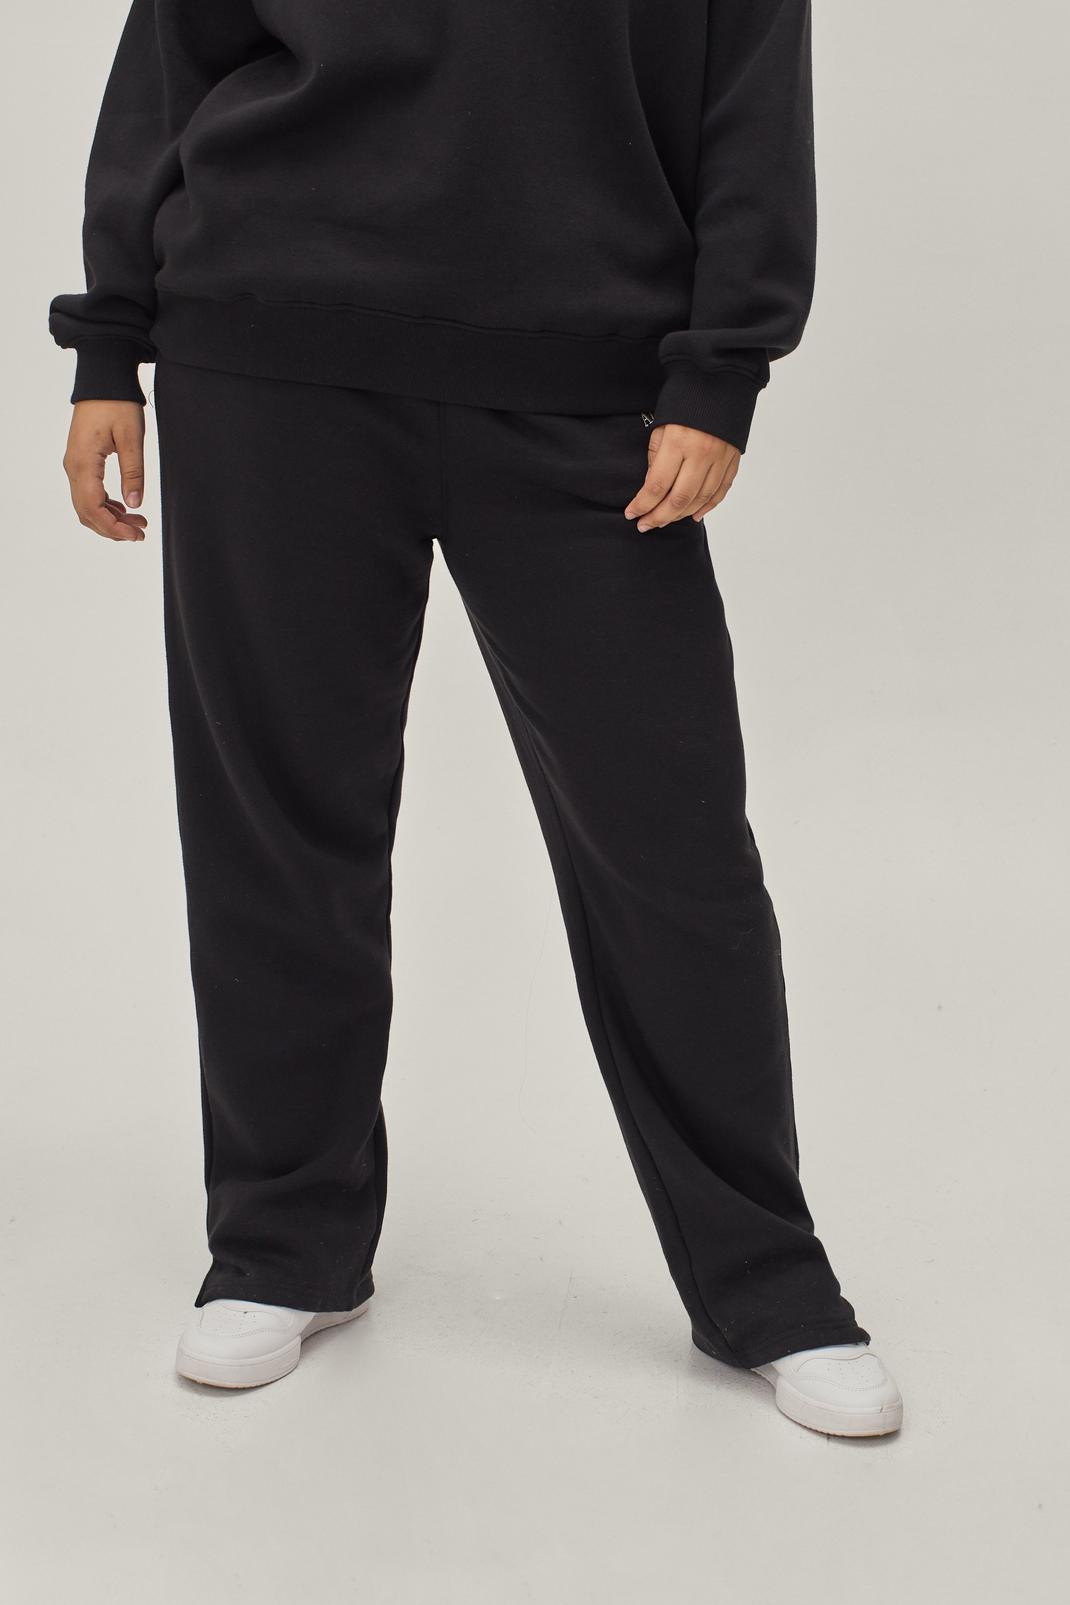 105 Plus Size Athleisure Graphic Wide Leg Sweatpants image number 2